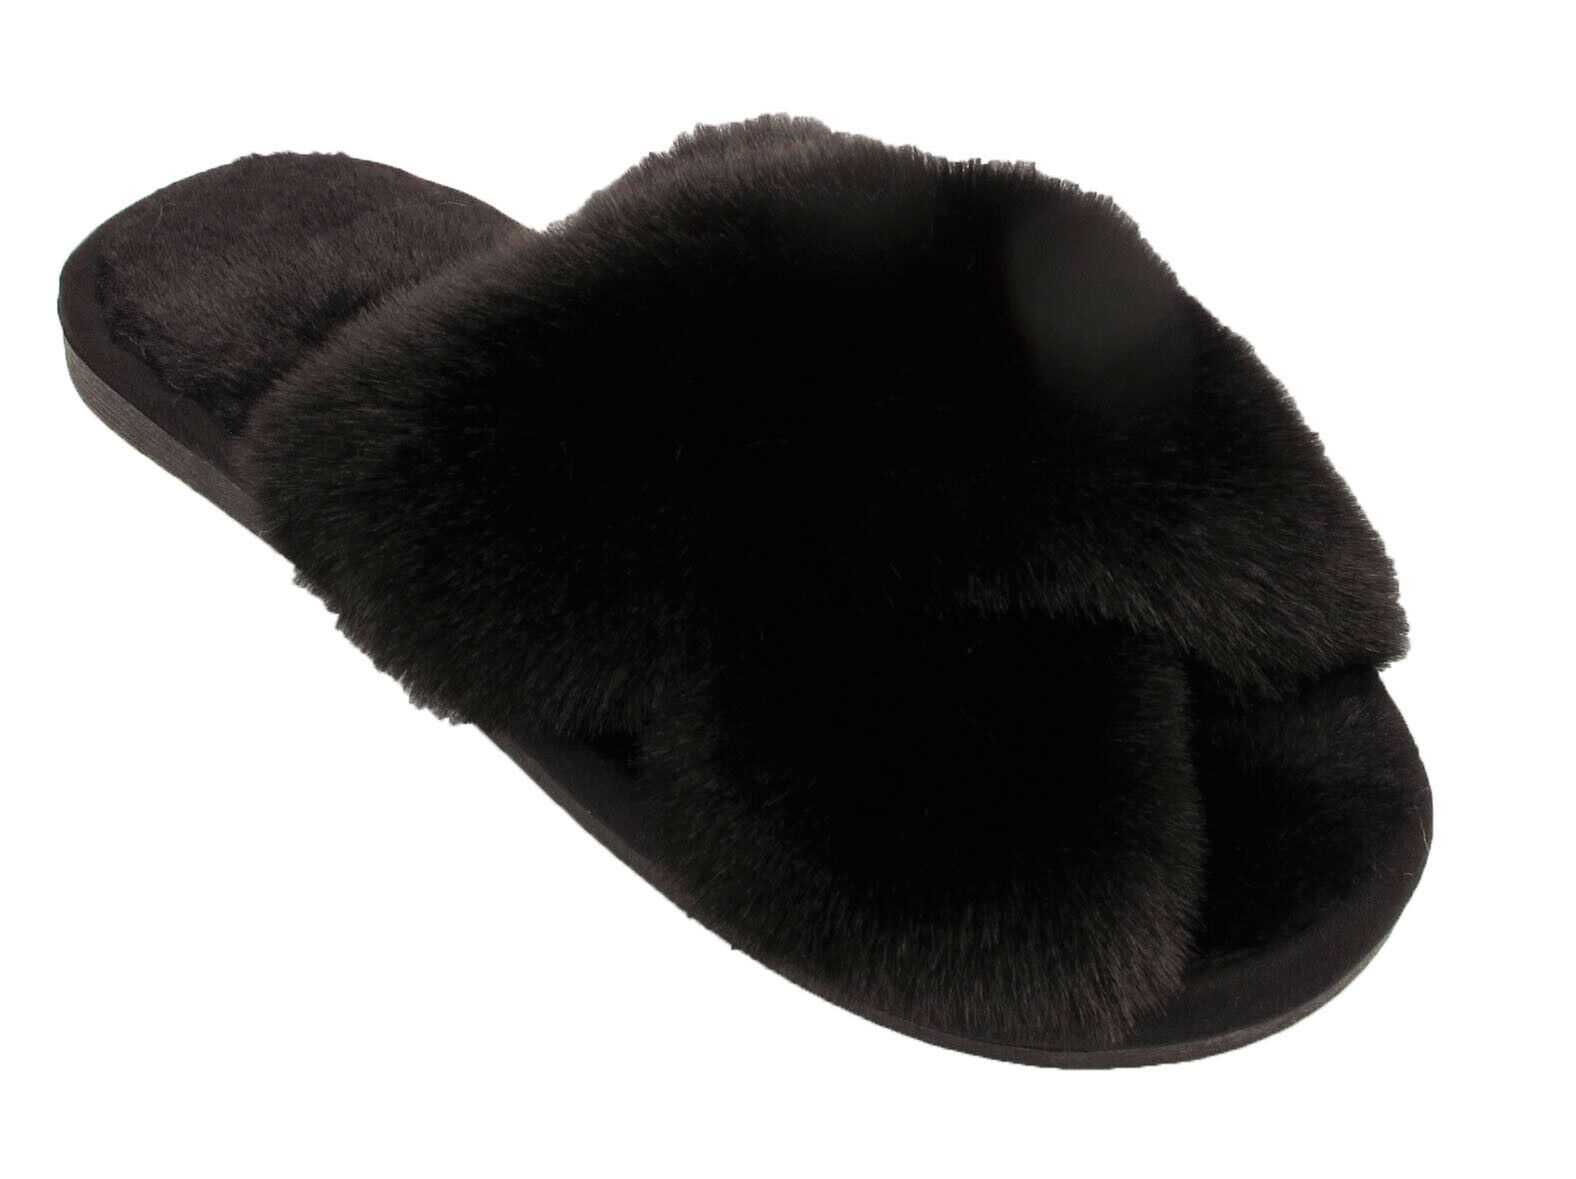 Size 3-4 Black Ladies Furry Slippers Women Fluffy Sliders Crossover Open Toe Faux Fur Mules